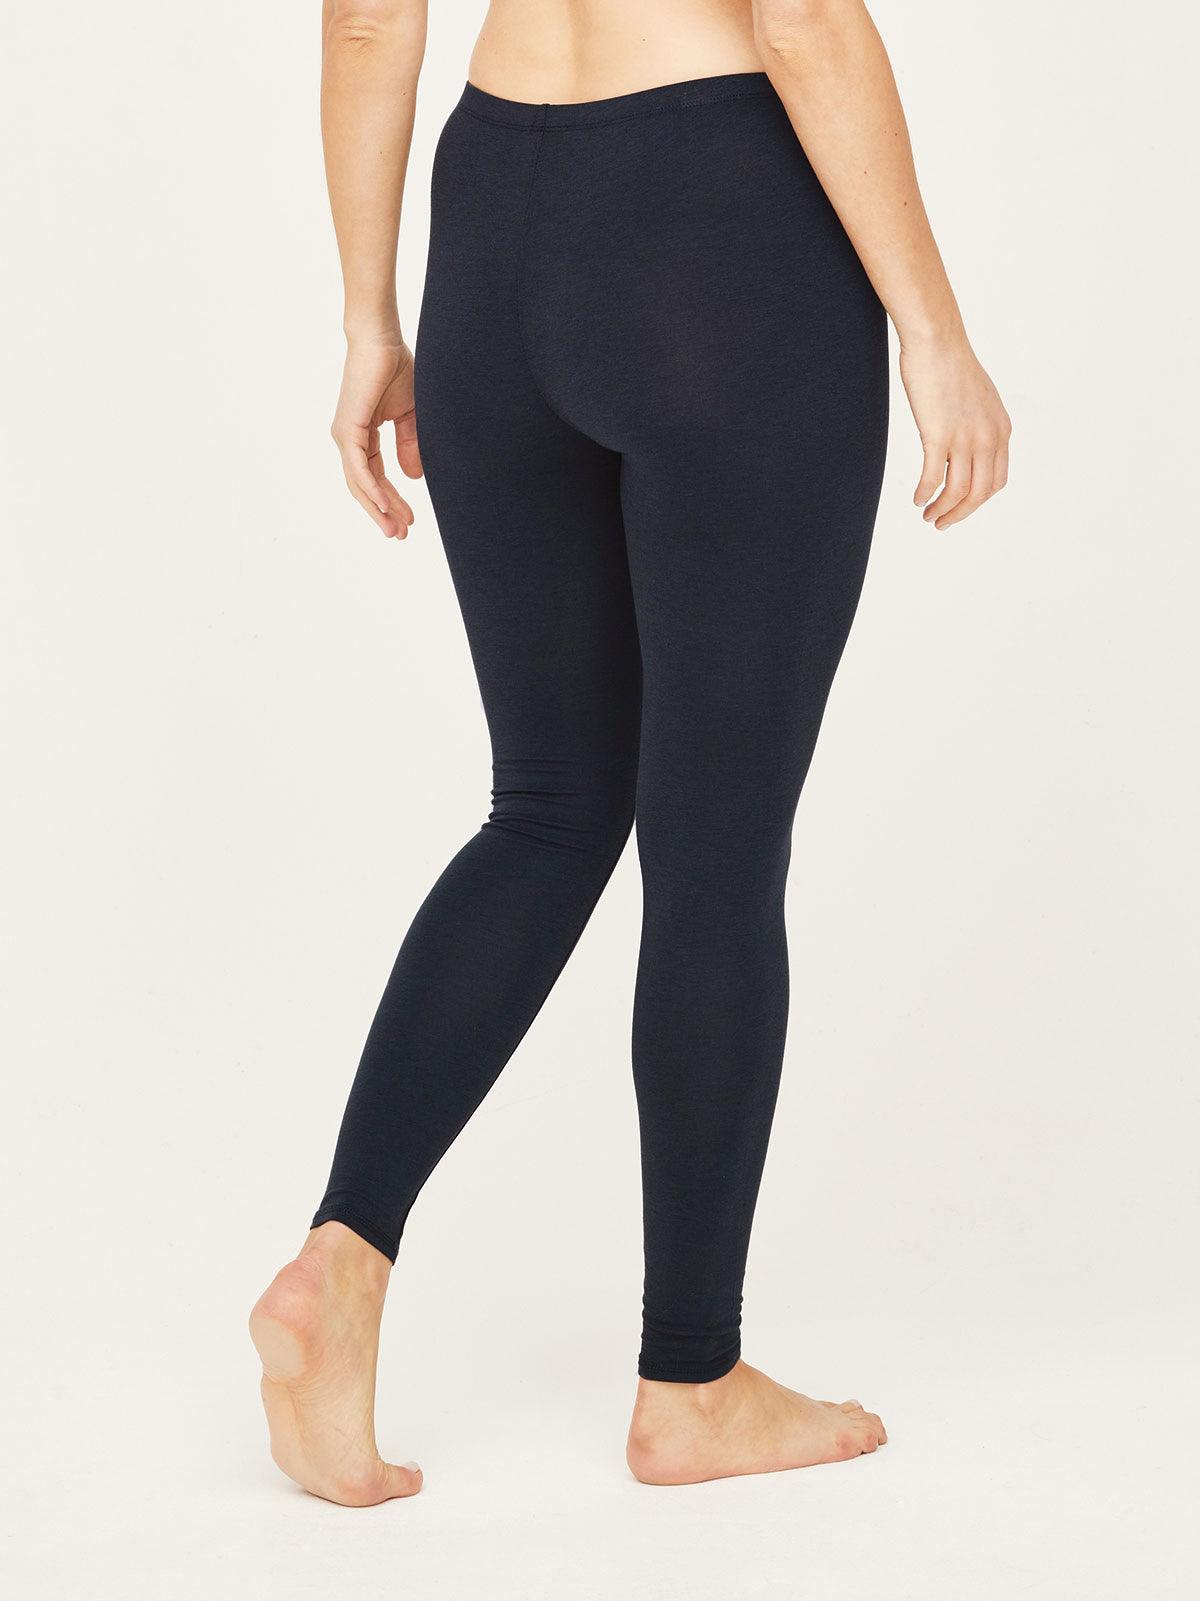 The Bamboo Base Layer Leggings in Midnight Navy